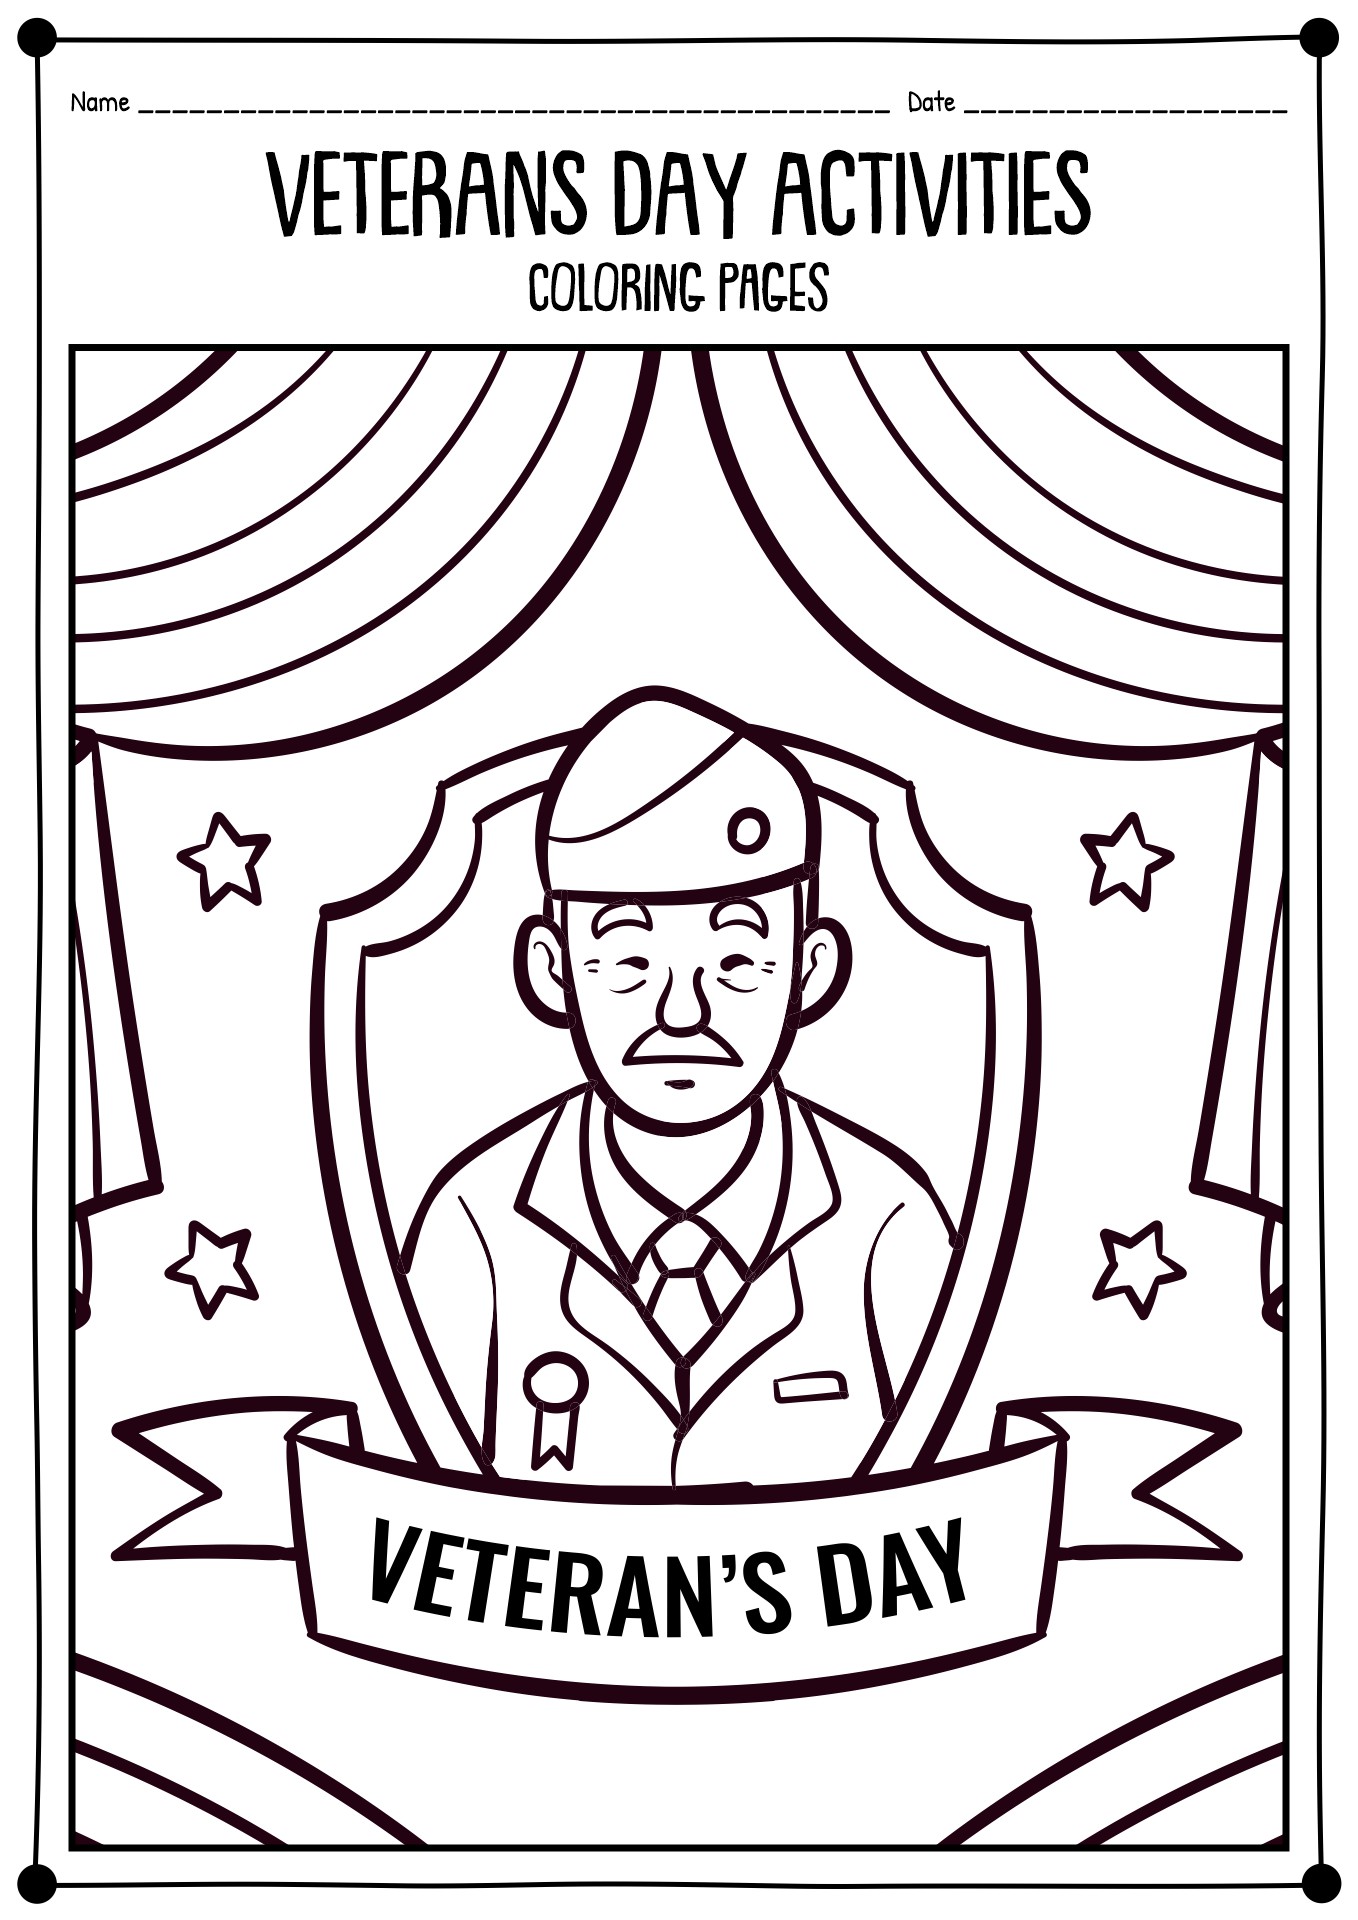 Veterans Day Coloring Pages For Kindergarten Veterans Day Coloring